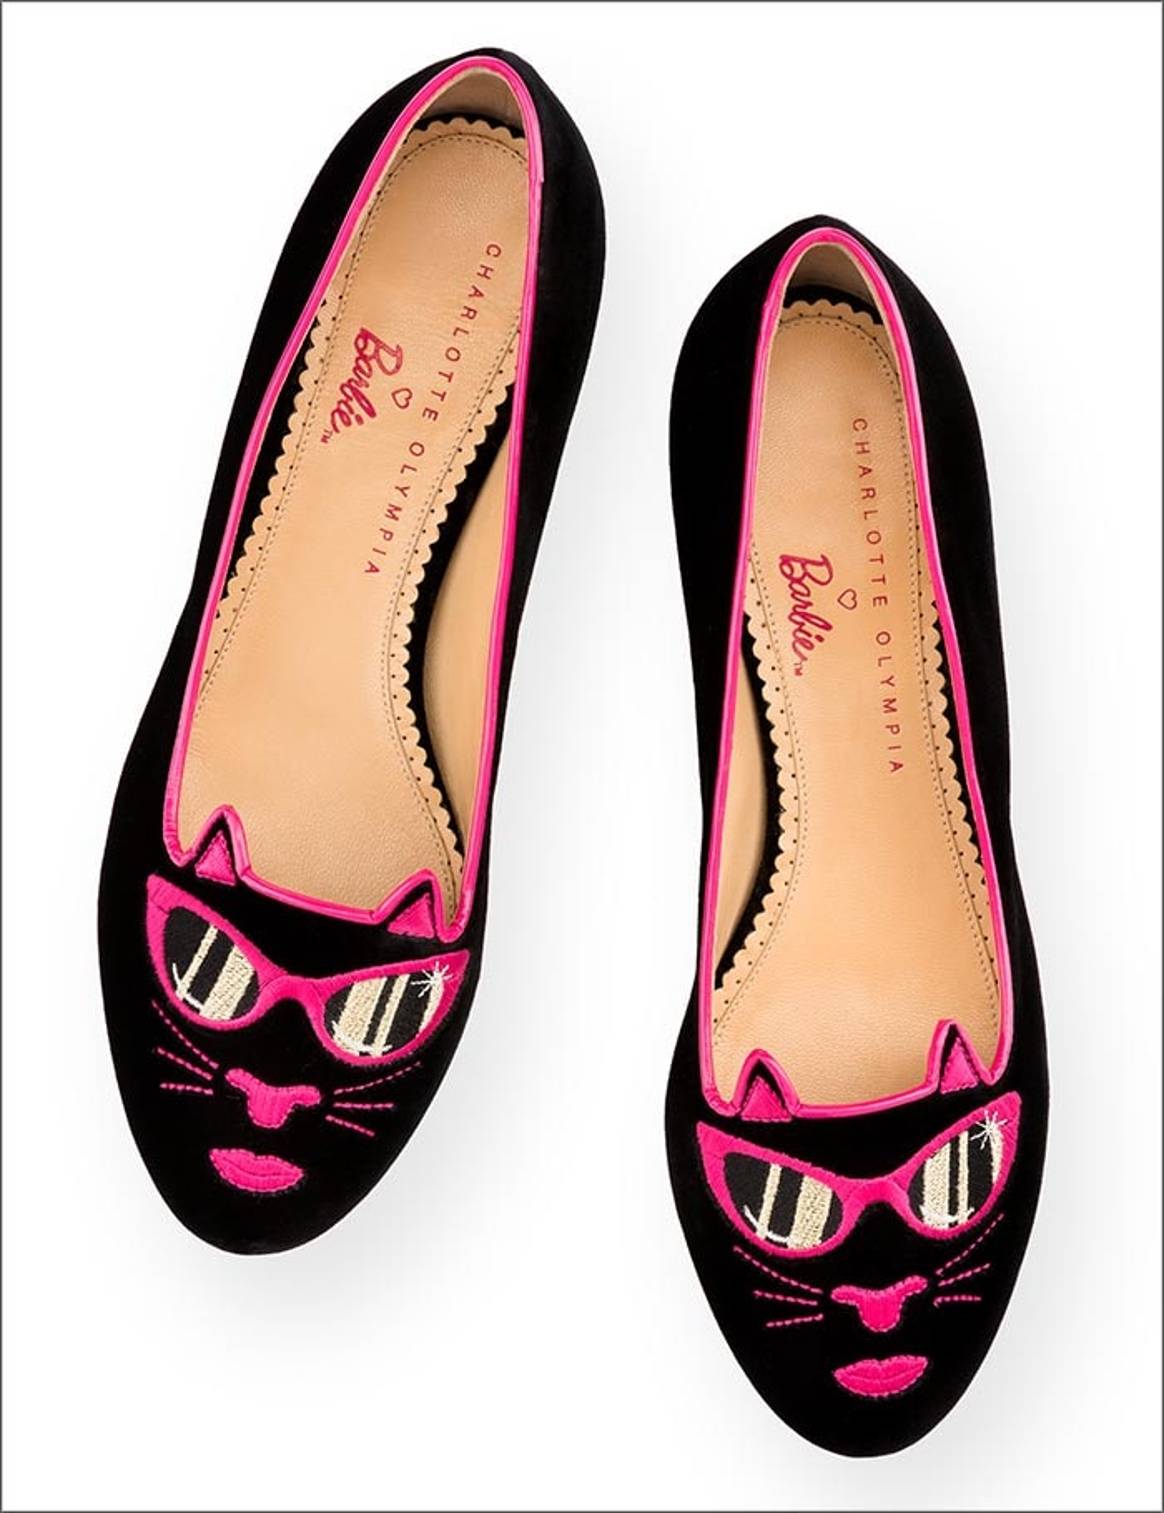 Charlotte Olympia launches Barbie collection